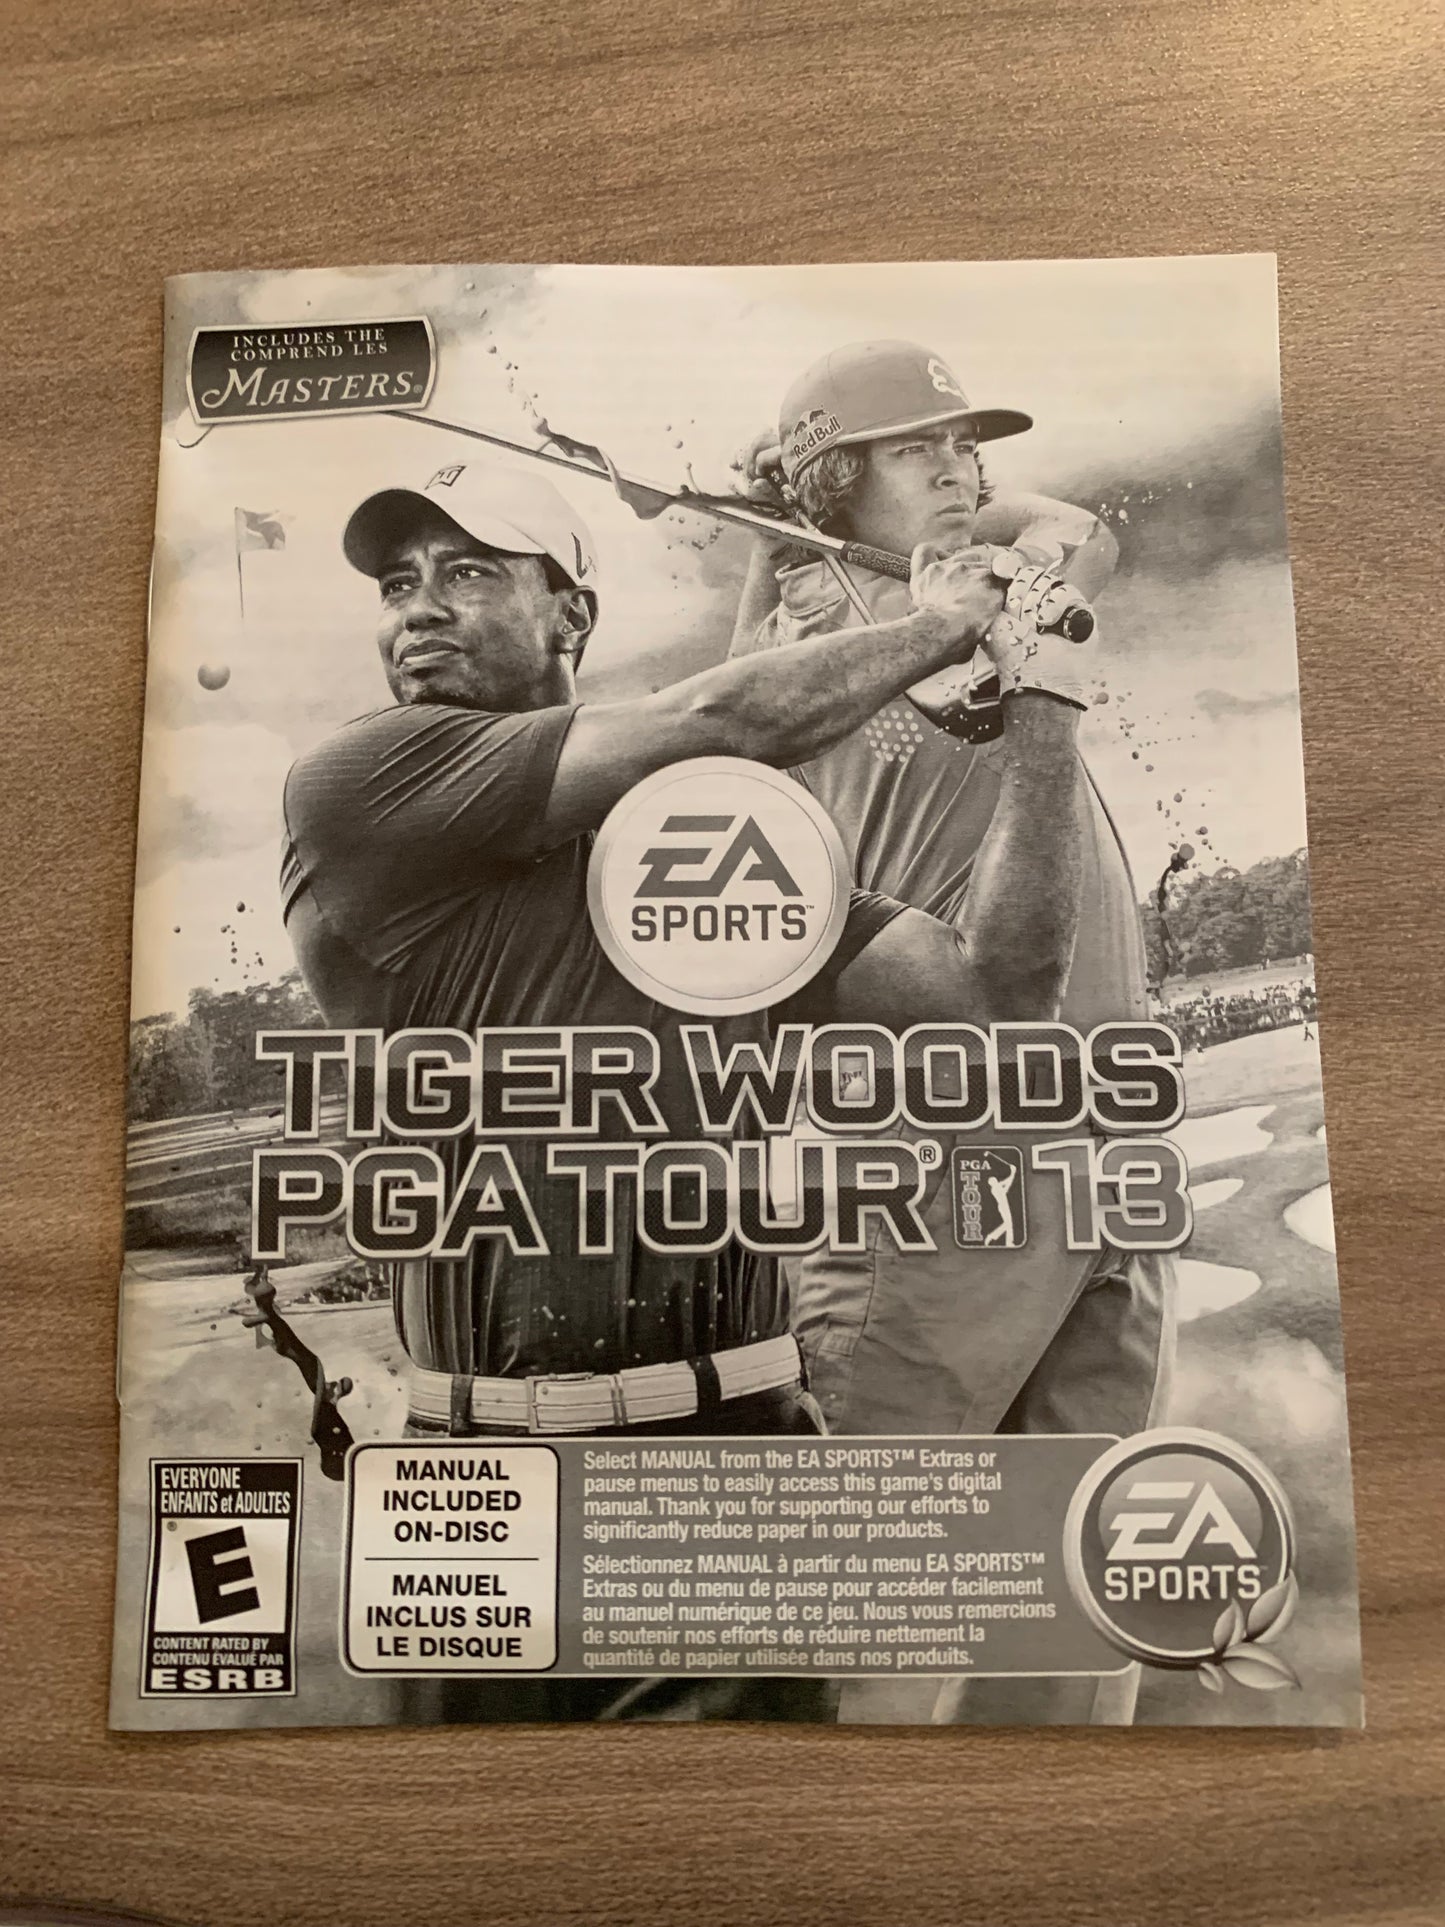 SONY PLAYSTATiON 3 [PS3] | TiGER WOODS PGA TOUR 13